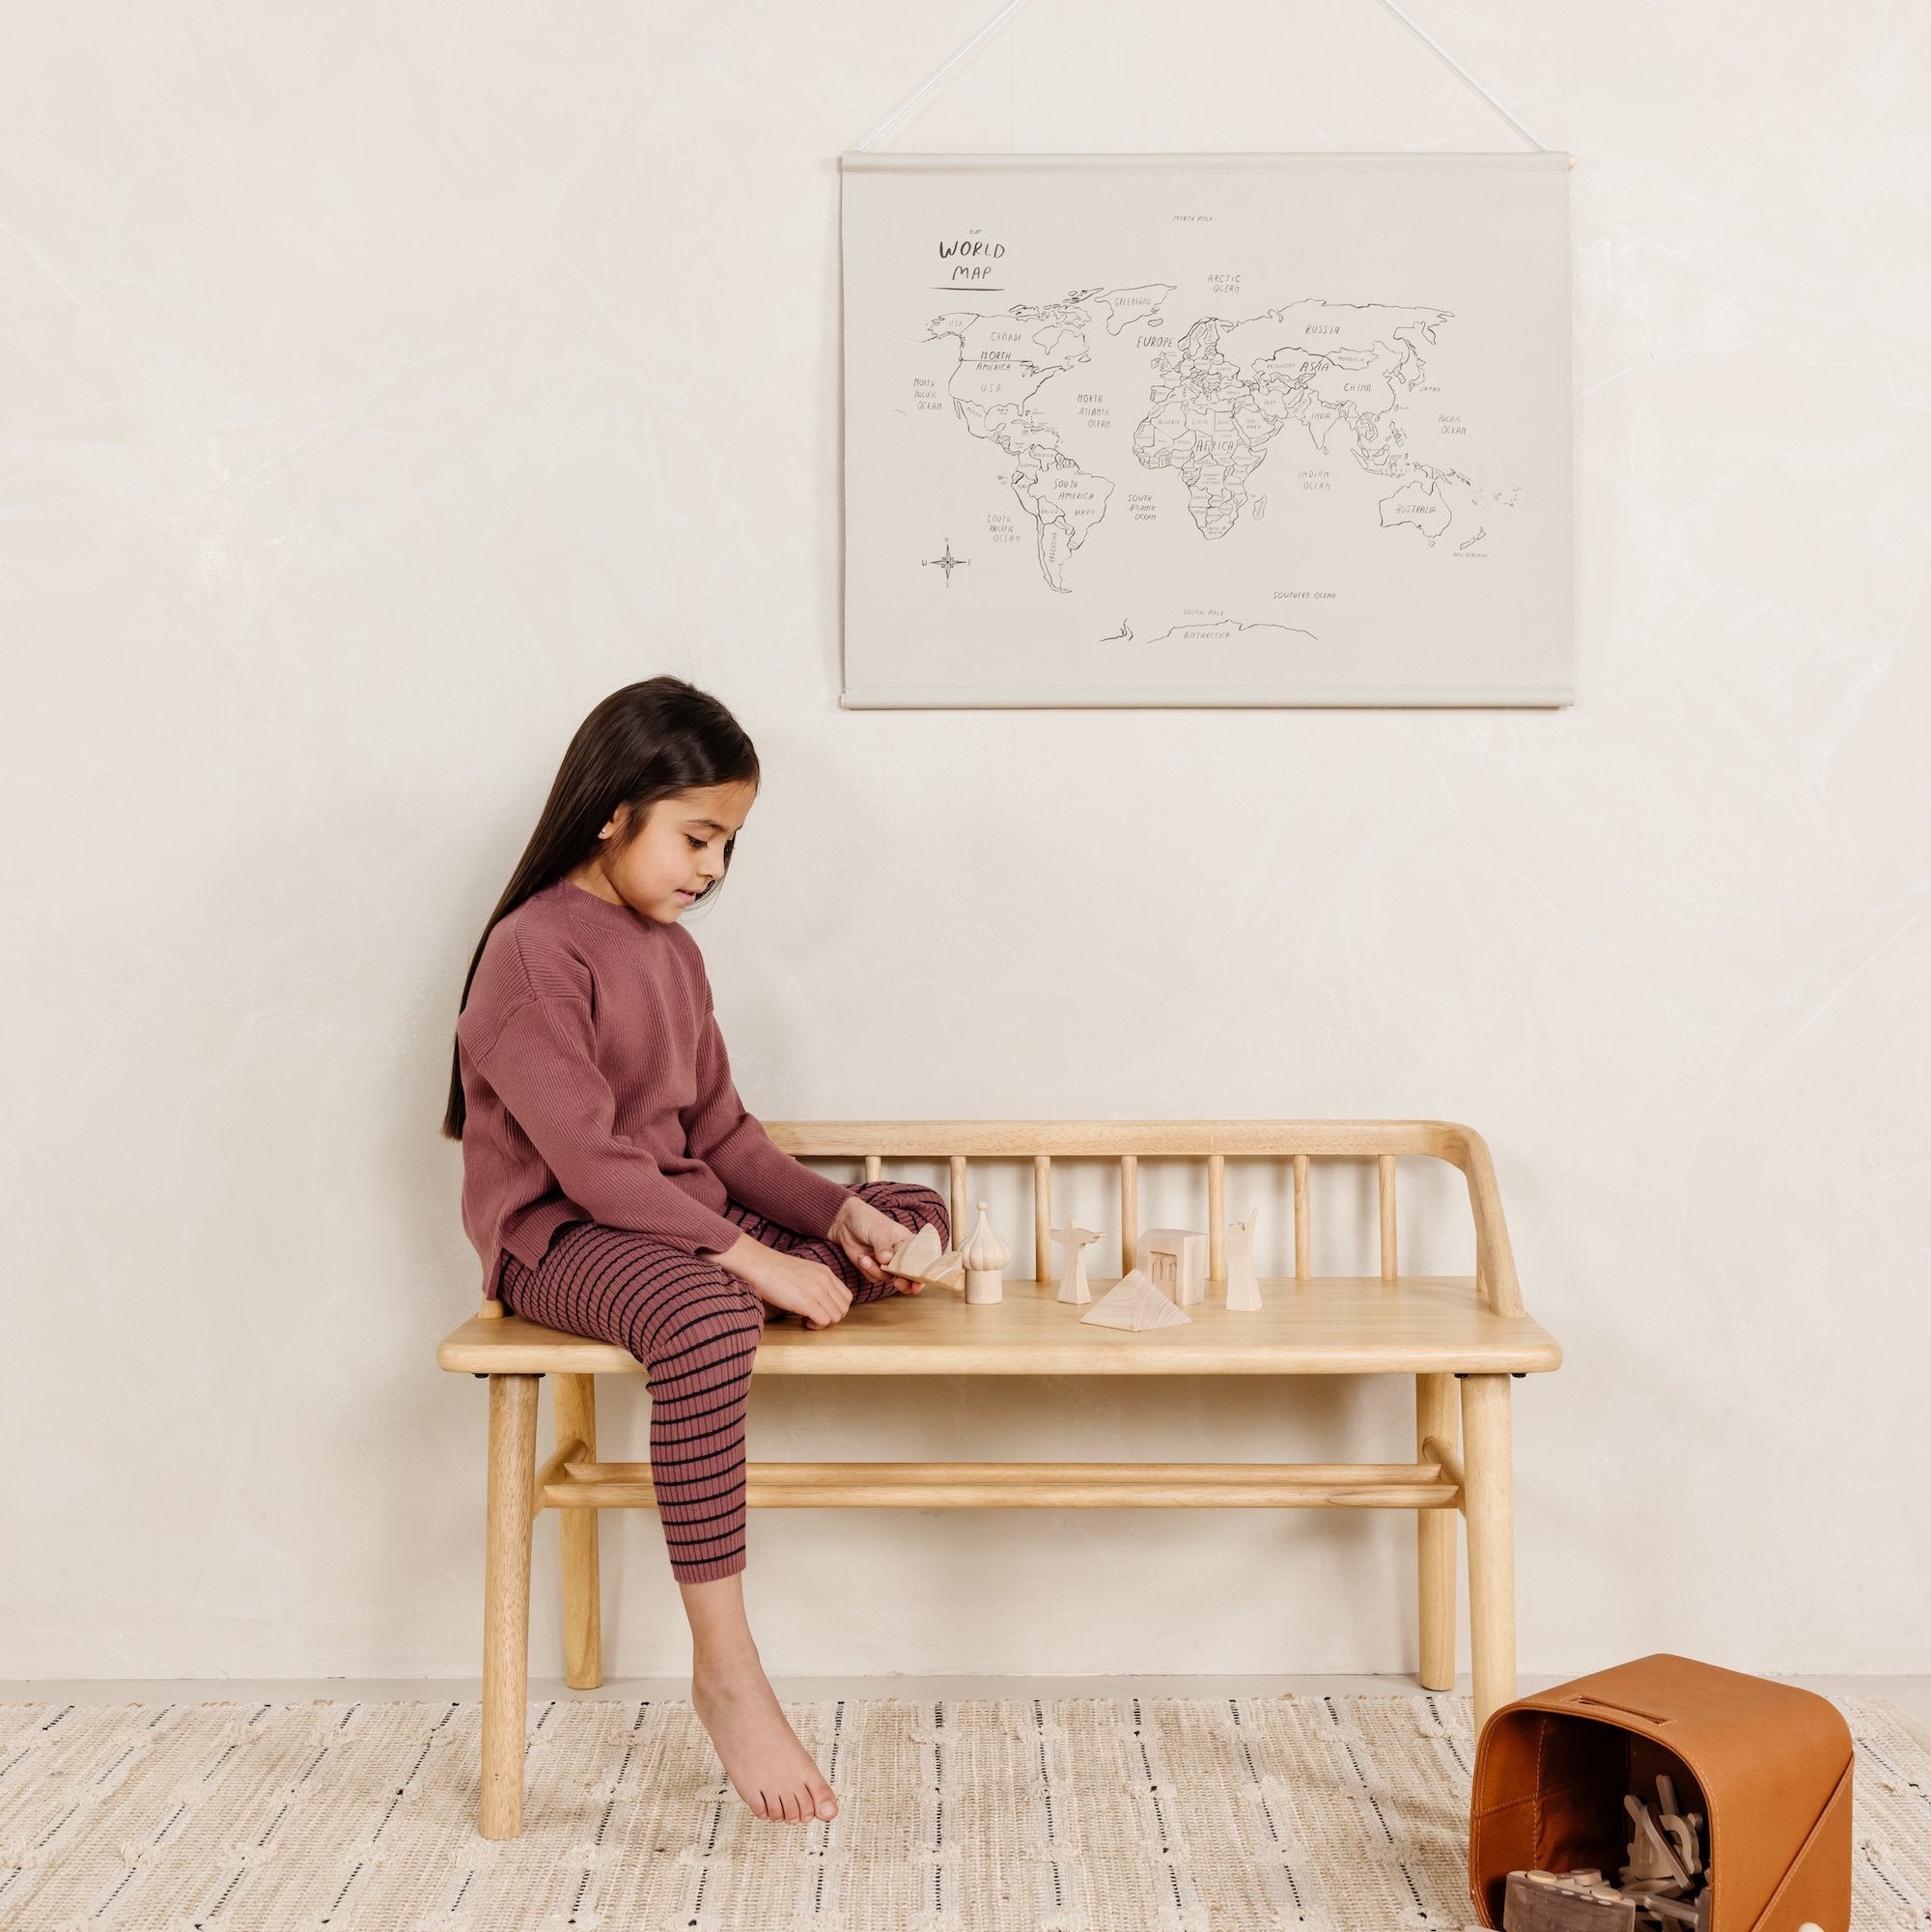 World Map@World Map Poster hangin on wall above little girl playing on a bench